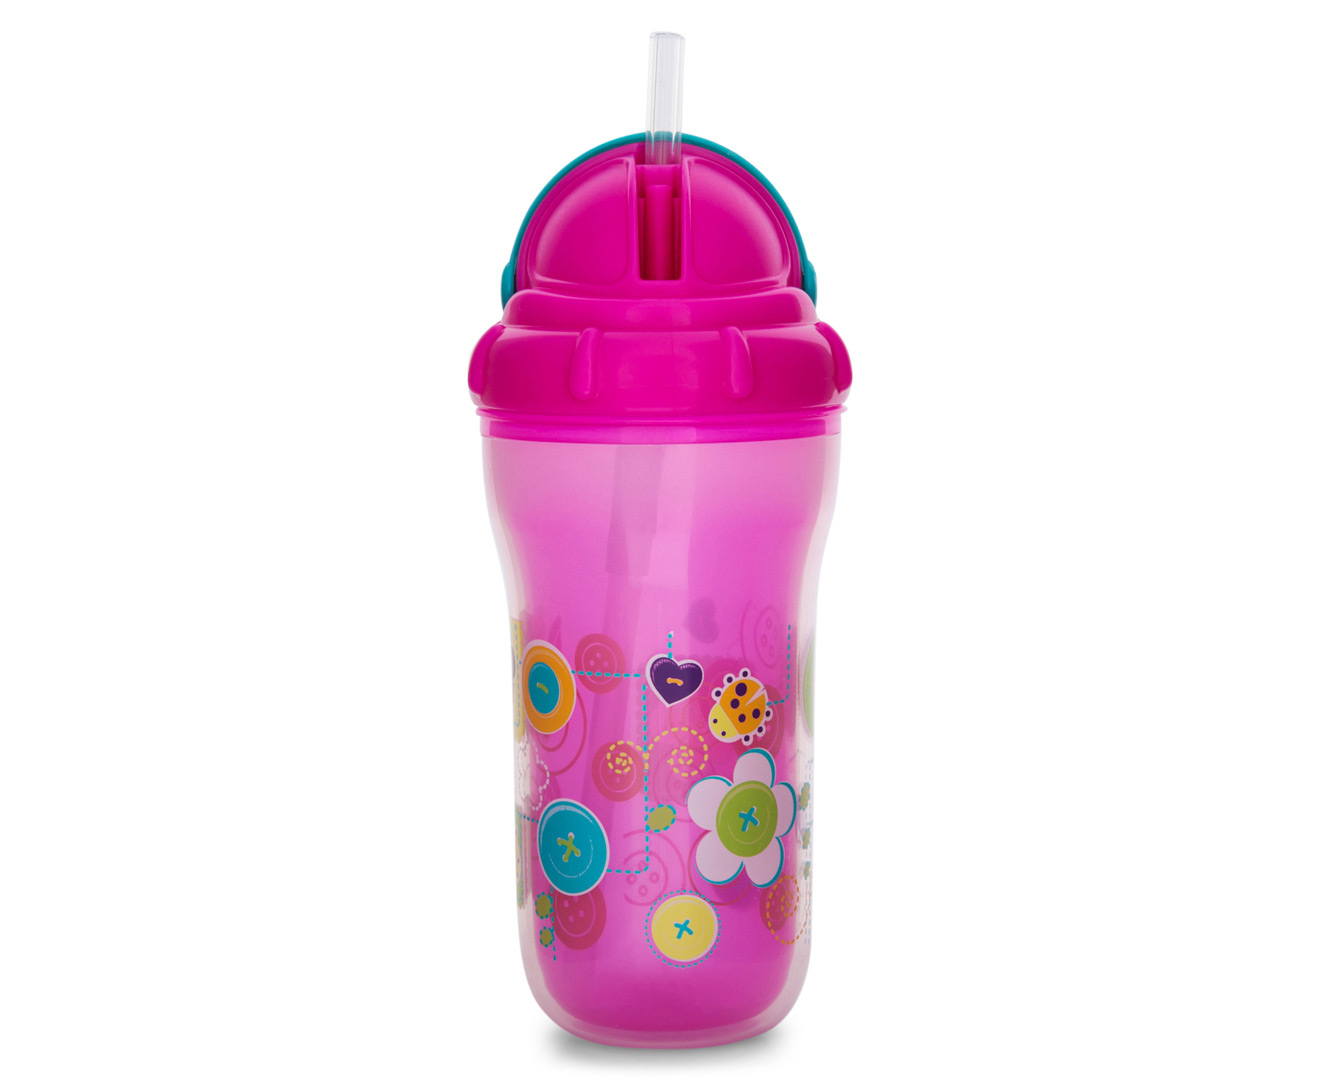 Nuby Insulated No-Spill Flip-It Cup - Pink/Aqua